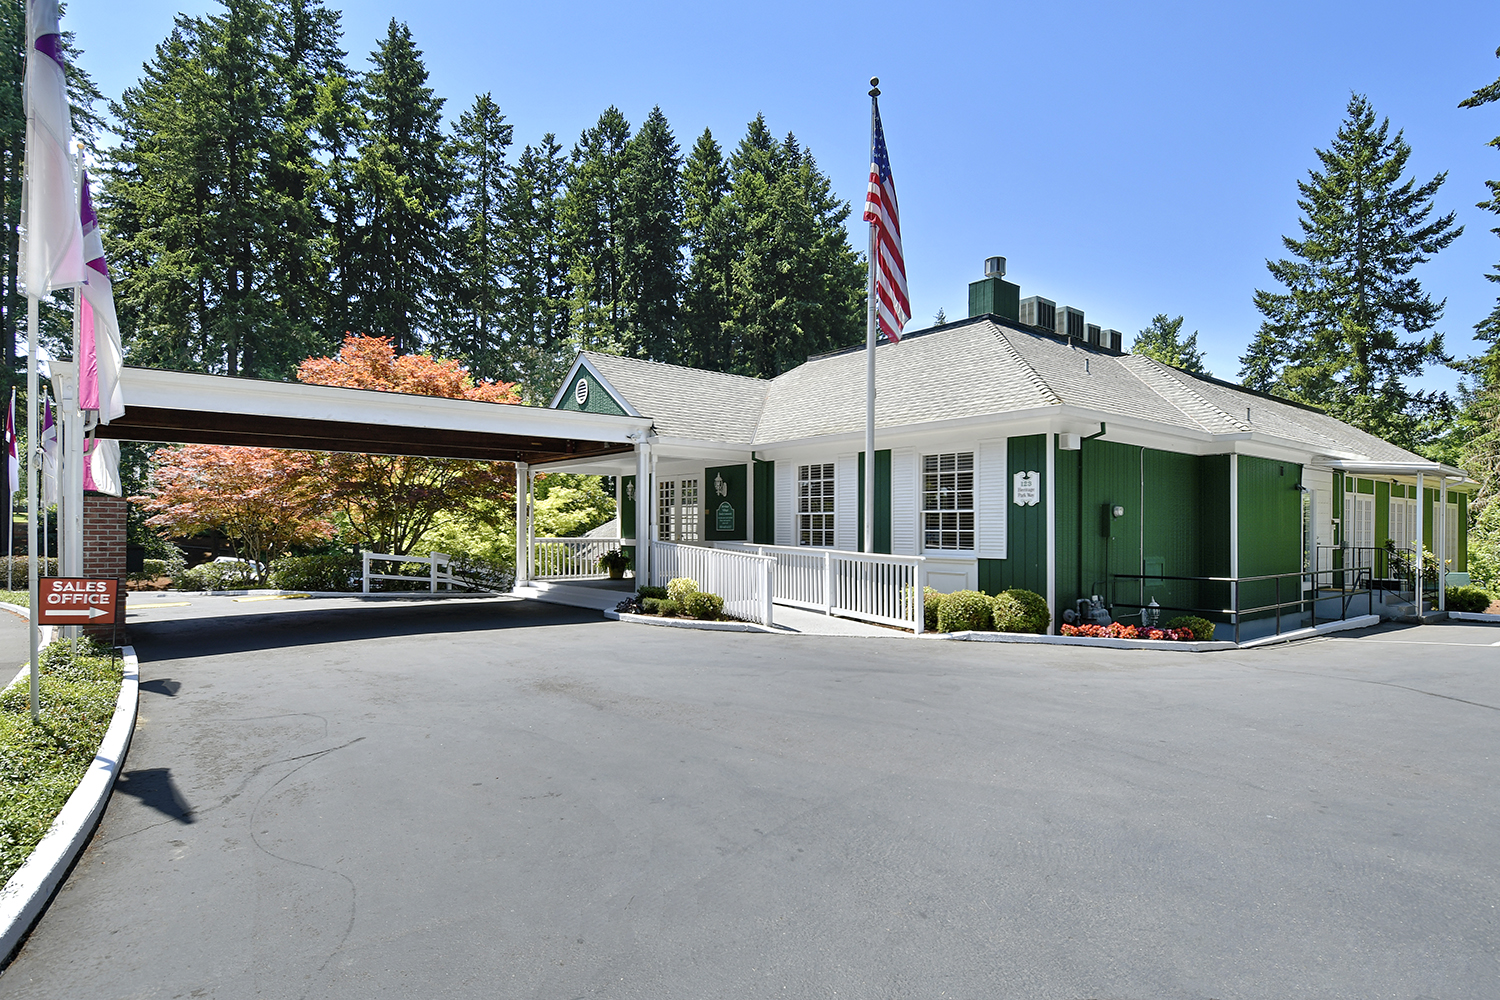 Heritage Village, an all age manufactured home community in Beaverton. Sales office inside green building and marked with red Sales Office sign pointing to the right. Large American flag on tall flagpole. Very tall trees in background. Clean, paved driveway up to building.